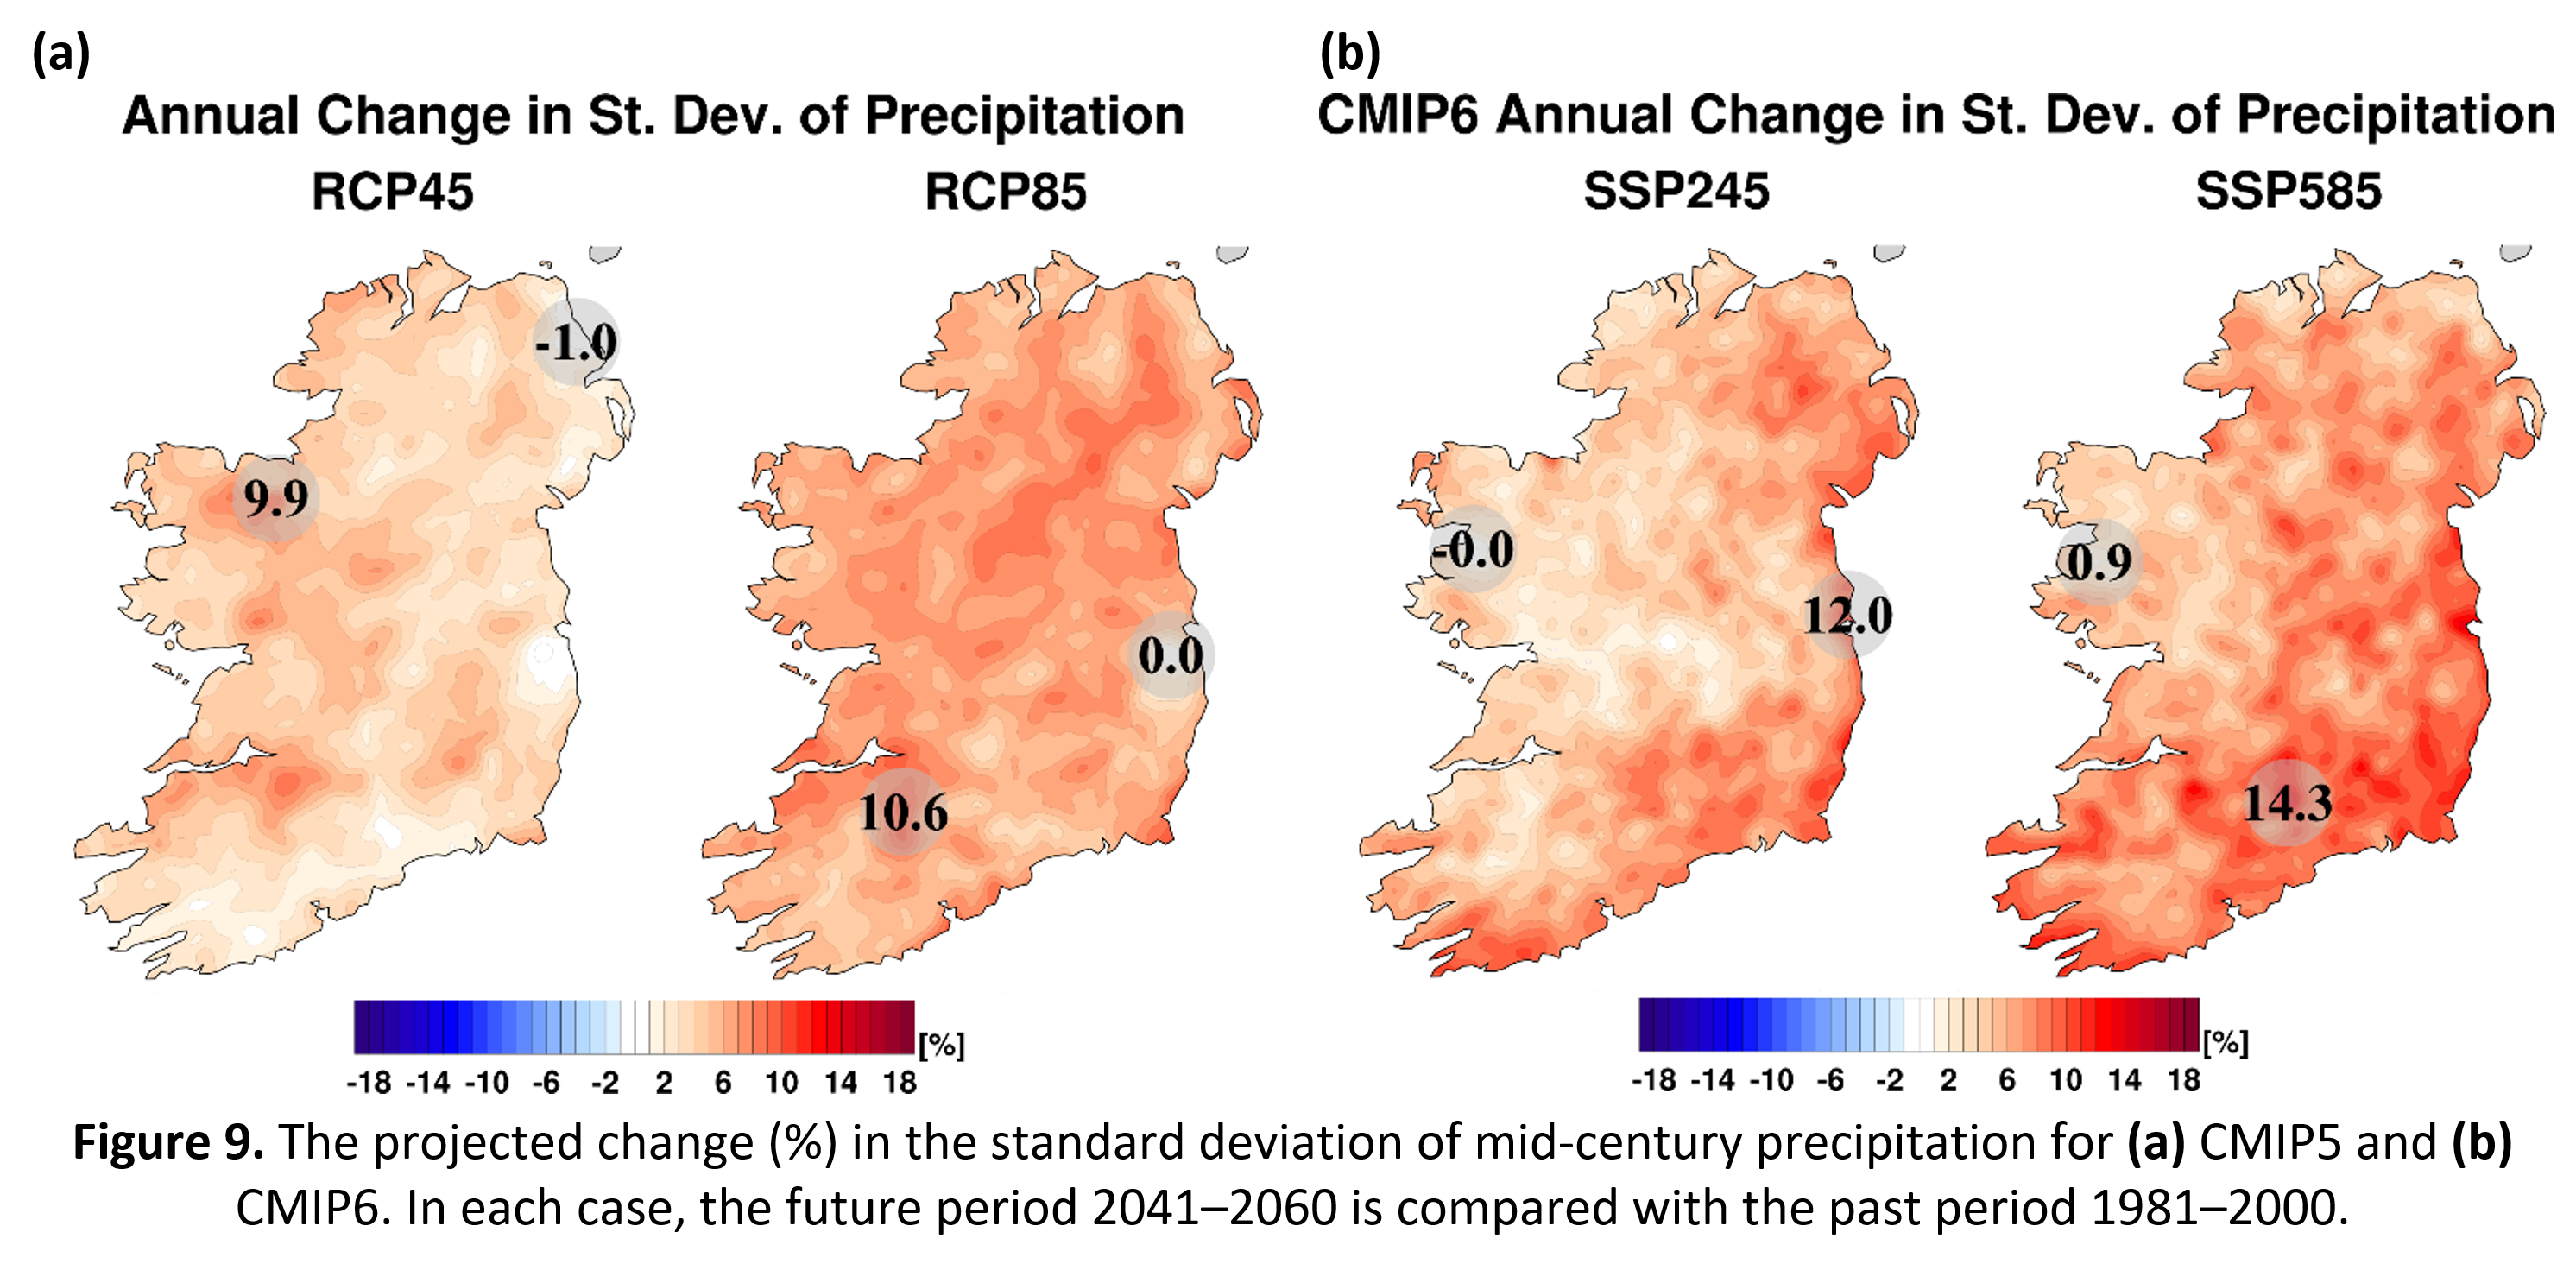 Figure 9. The projected change (%) in the standard deviation of mid-century precipitation for (a) CMIP5 and (b) CMIP6. In each case, the future period 2041–2060 is compared with the past period 1981–2000.